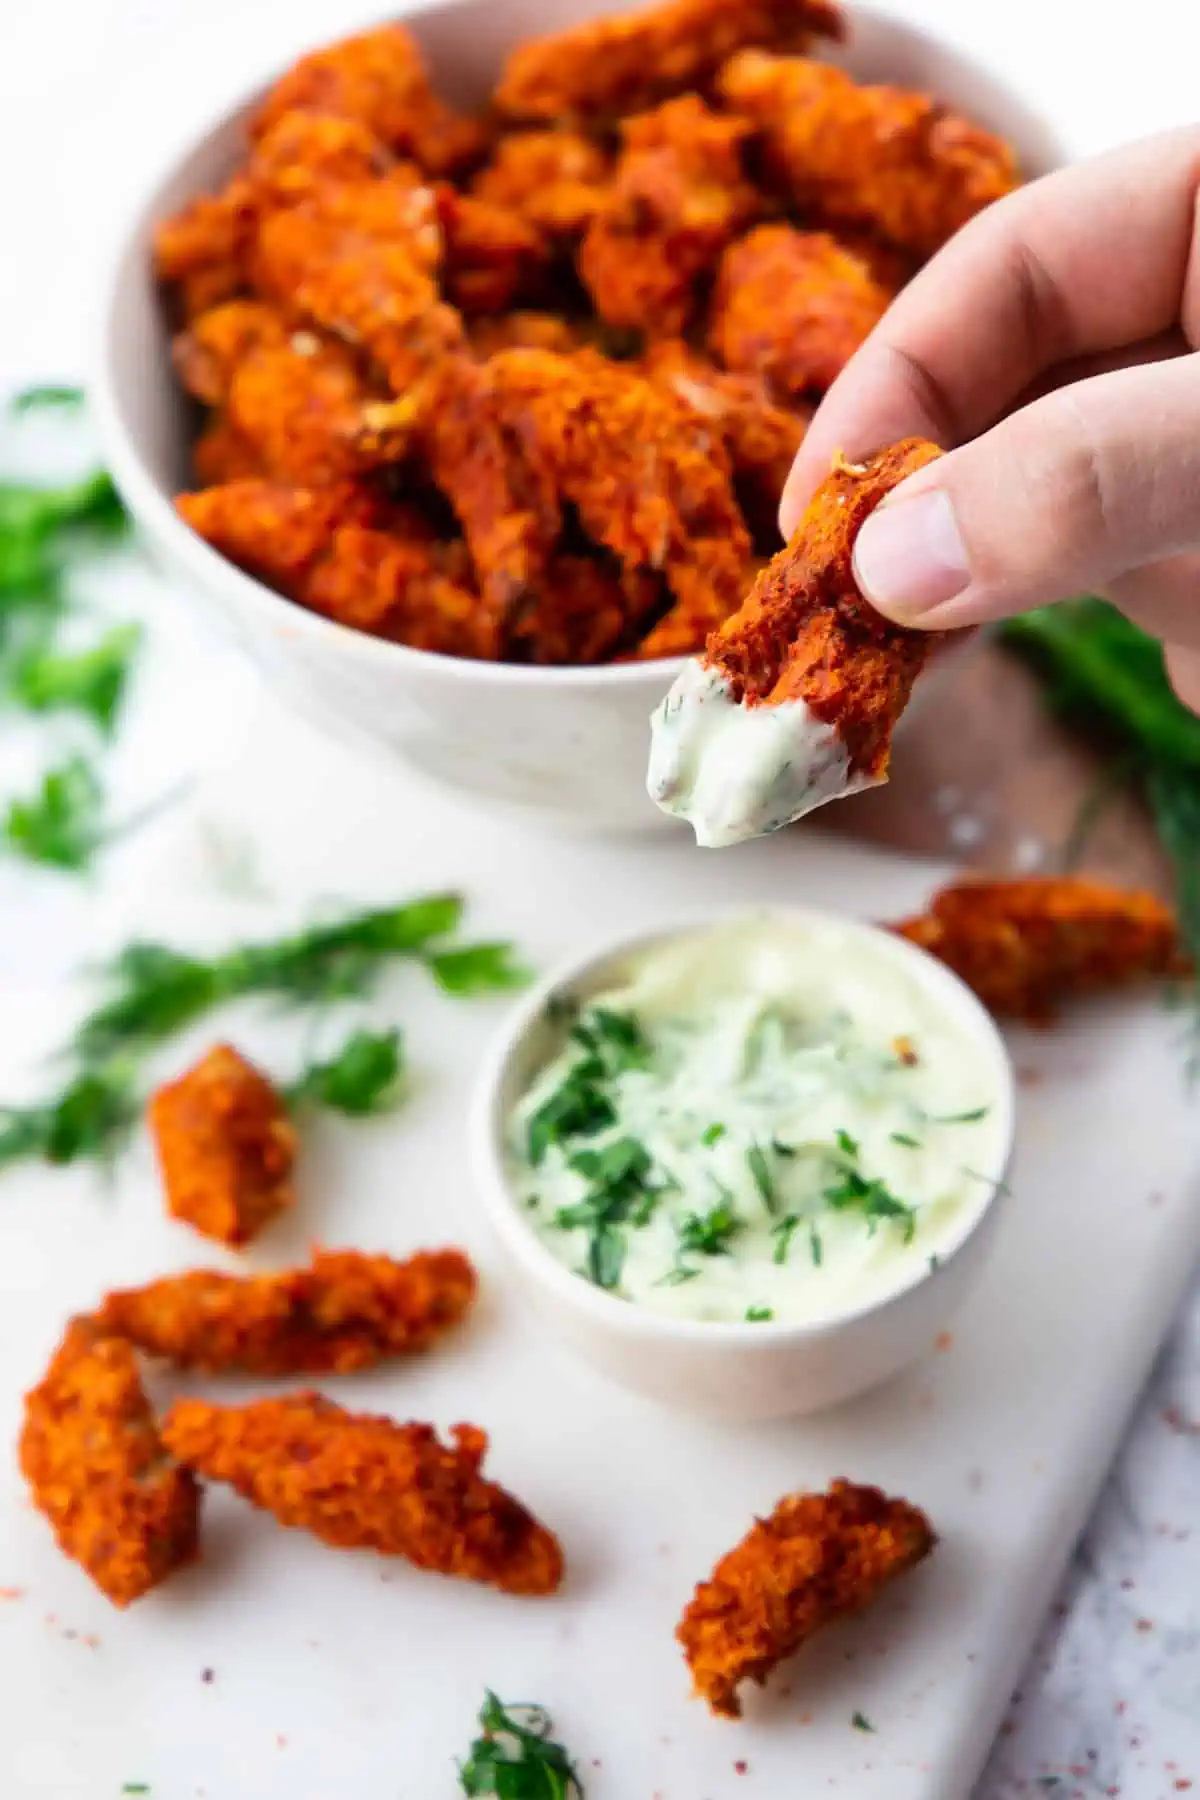 A bowl of vegan chicken behind a hand holding one piece of vegan chicken that has been dipped in vegan ranch sauce.